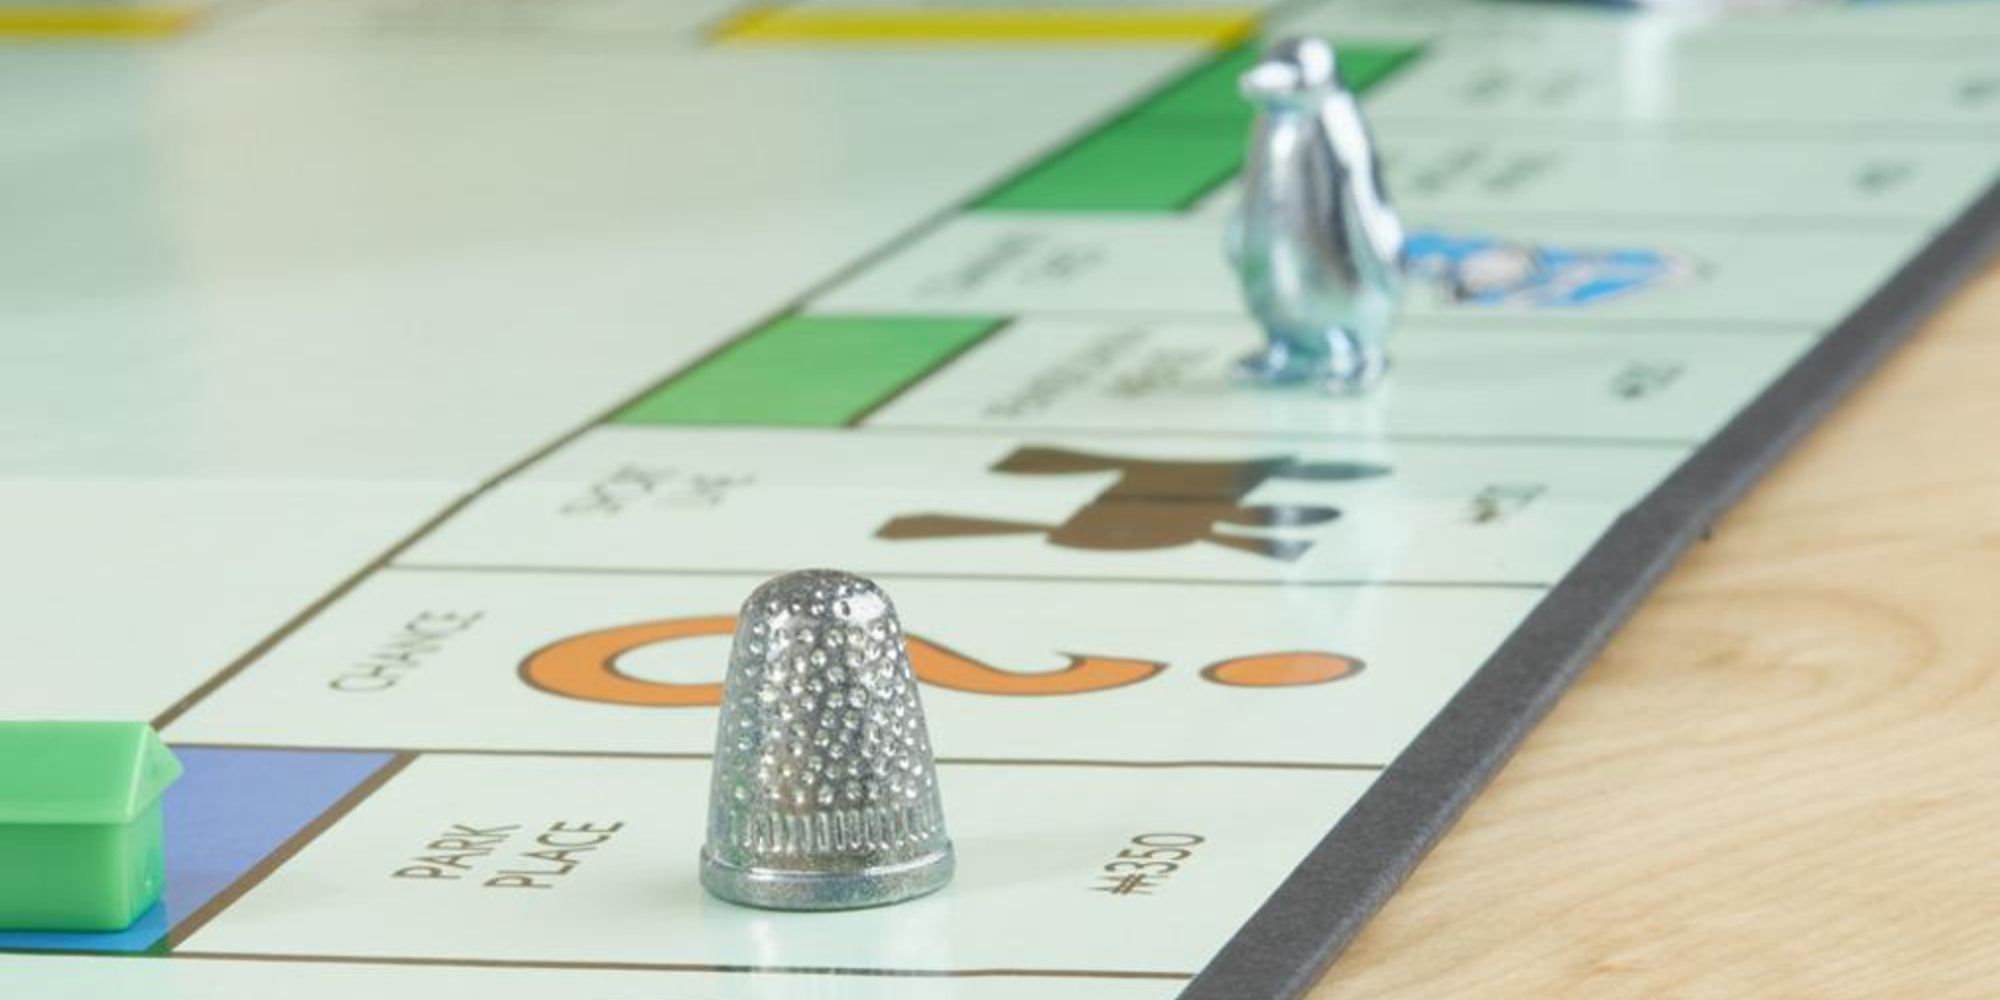 official hasbro image of monopoly thimble